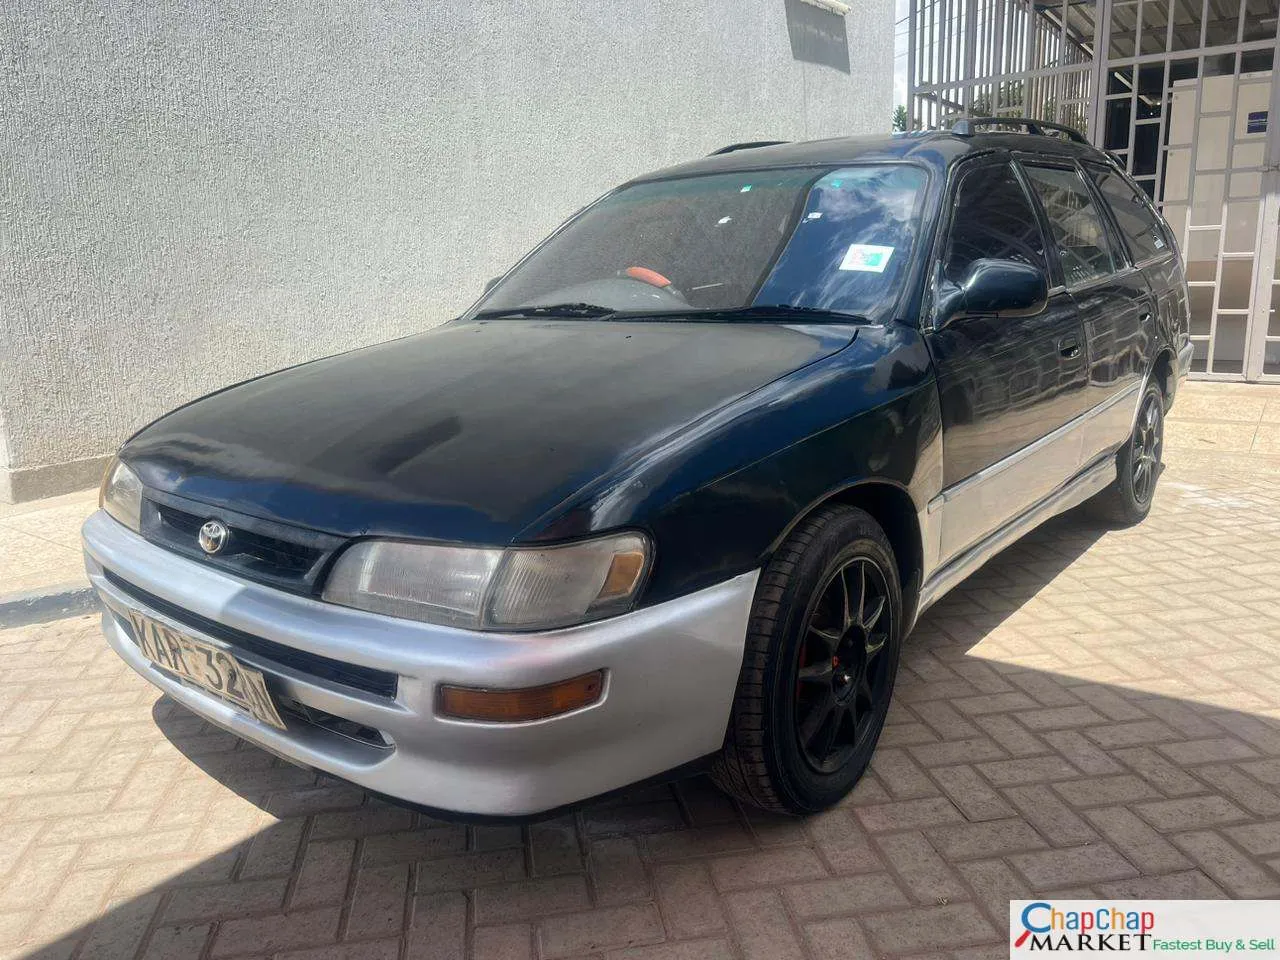 Cars Cars For Sale-Toyota Corolla L G touring DX You Pay 40% Deposit Trade in OK Corolla for sale in kenya hire purchase installments EXCLUSIVE Corolla kenya hire purchase installments 7